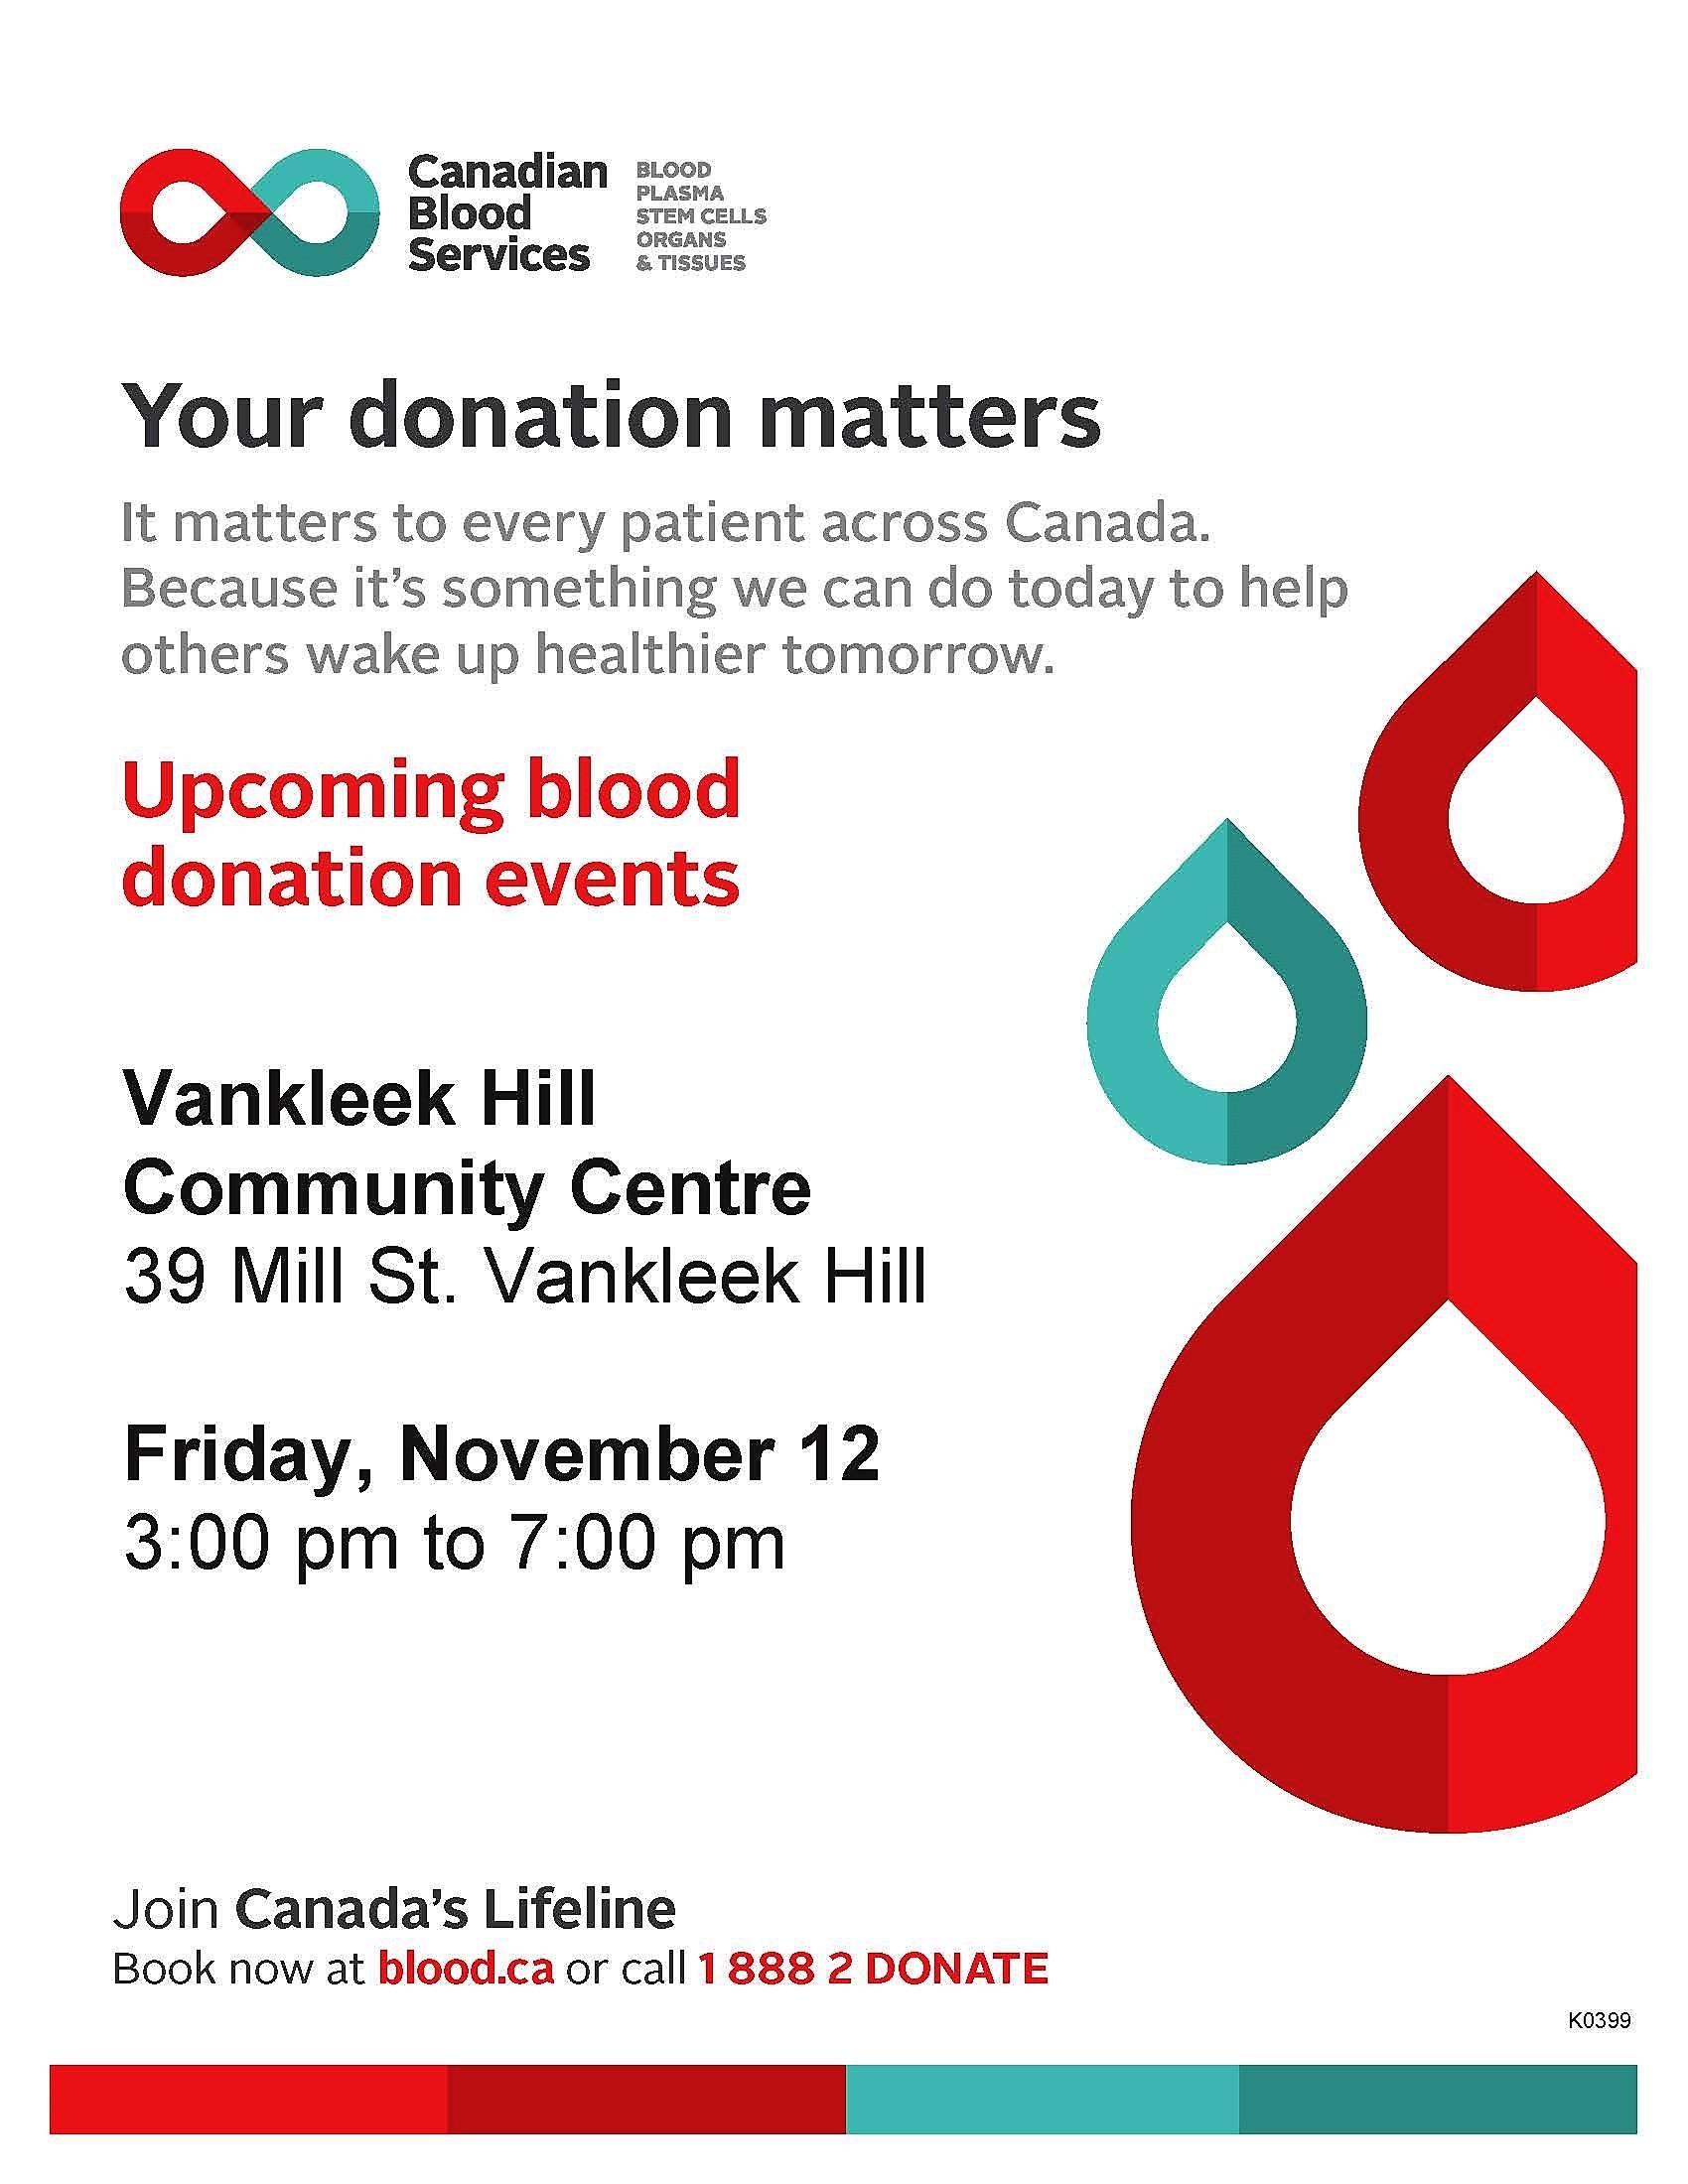 Register now for November 12 Vankleek Hill Canadian Blood Services donation clinic